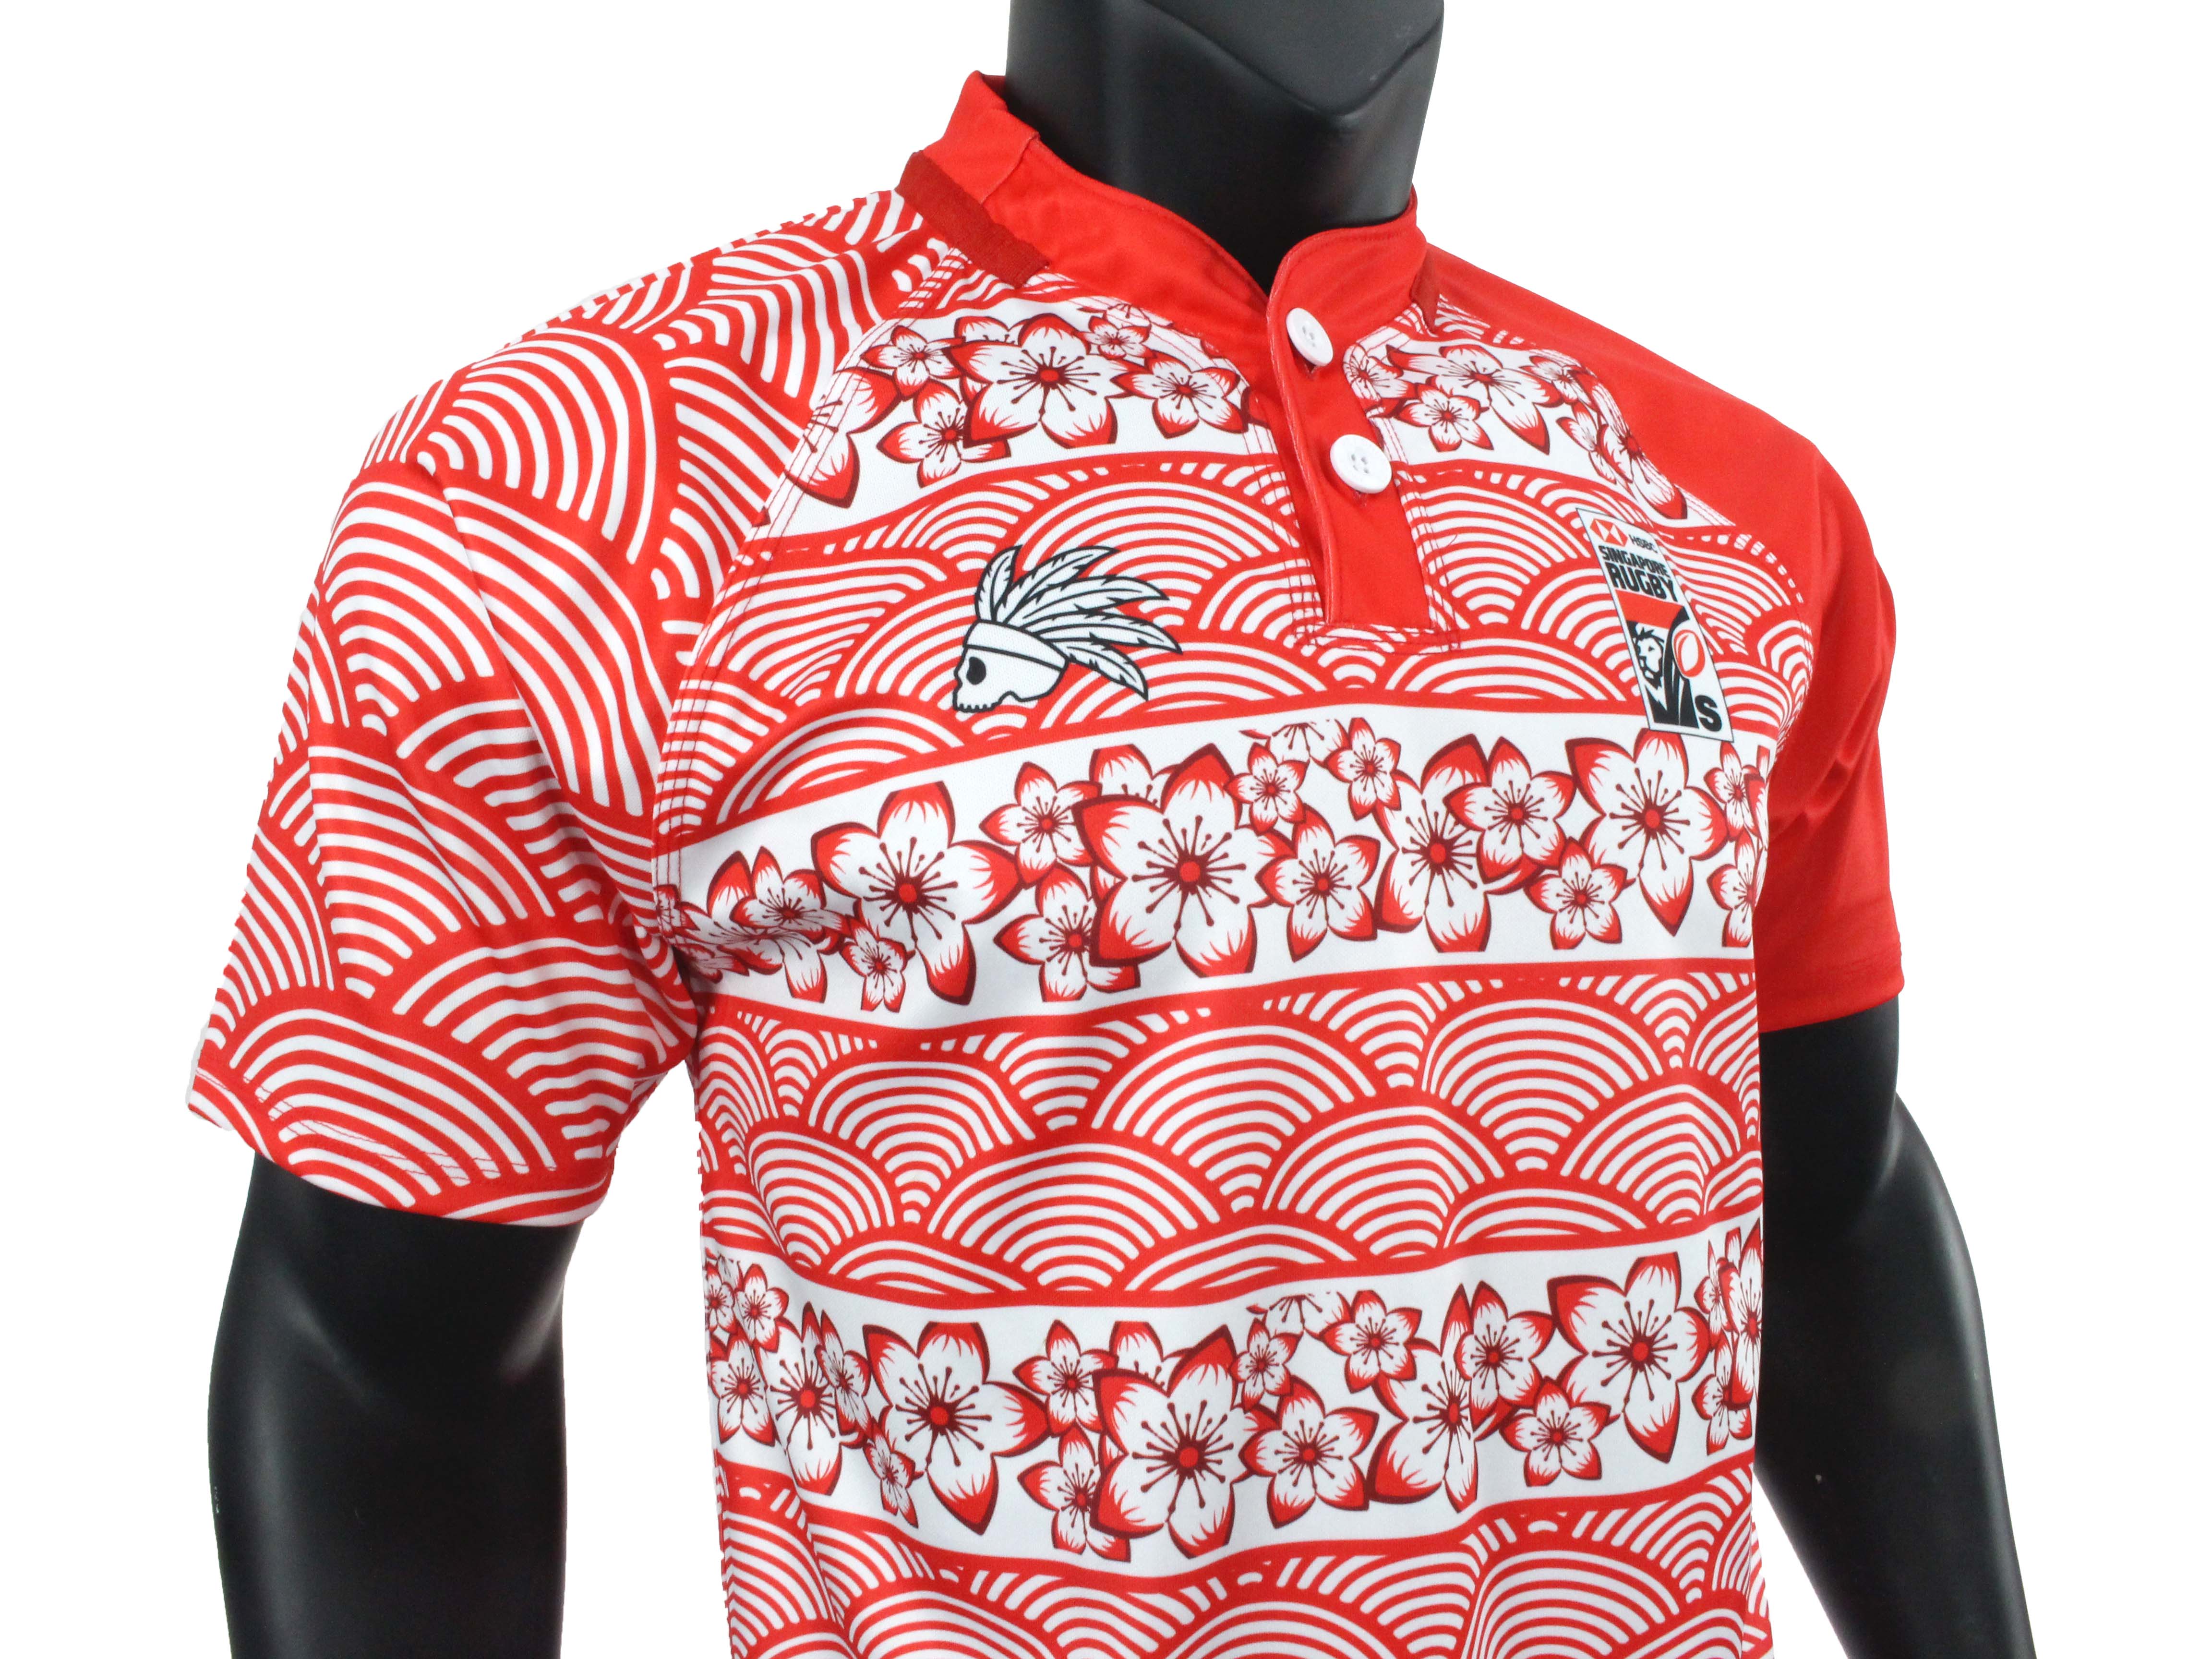 JAPAN RUGBY JERSEY